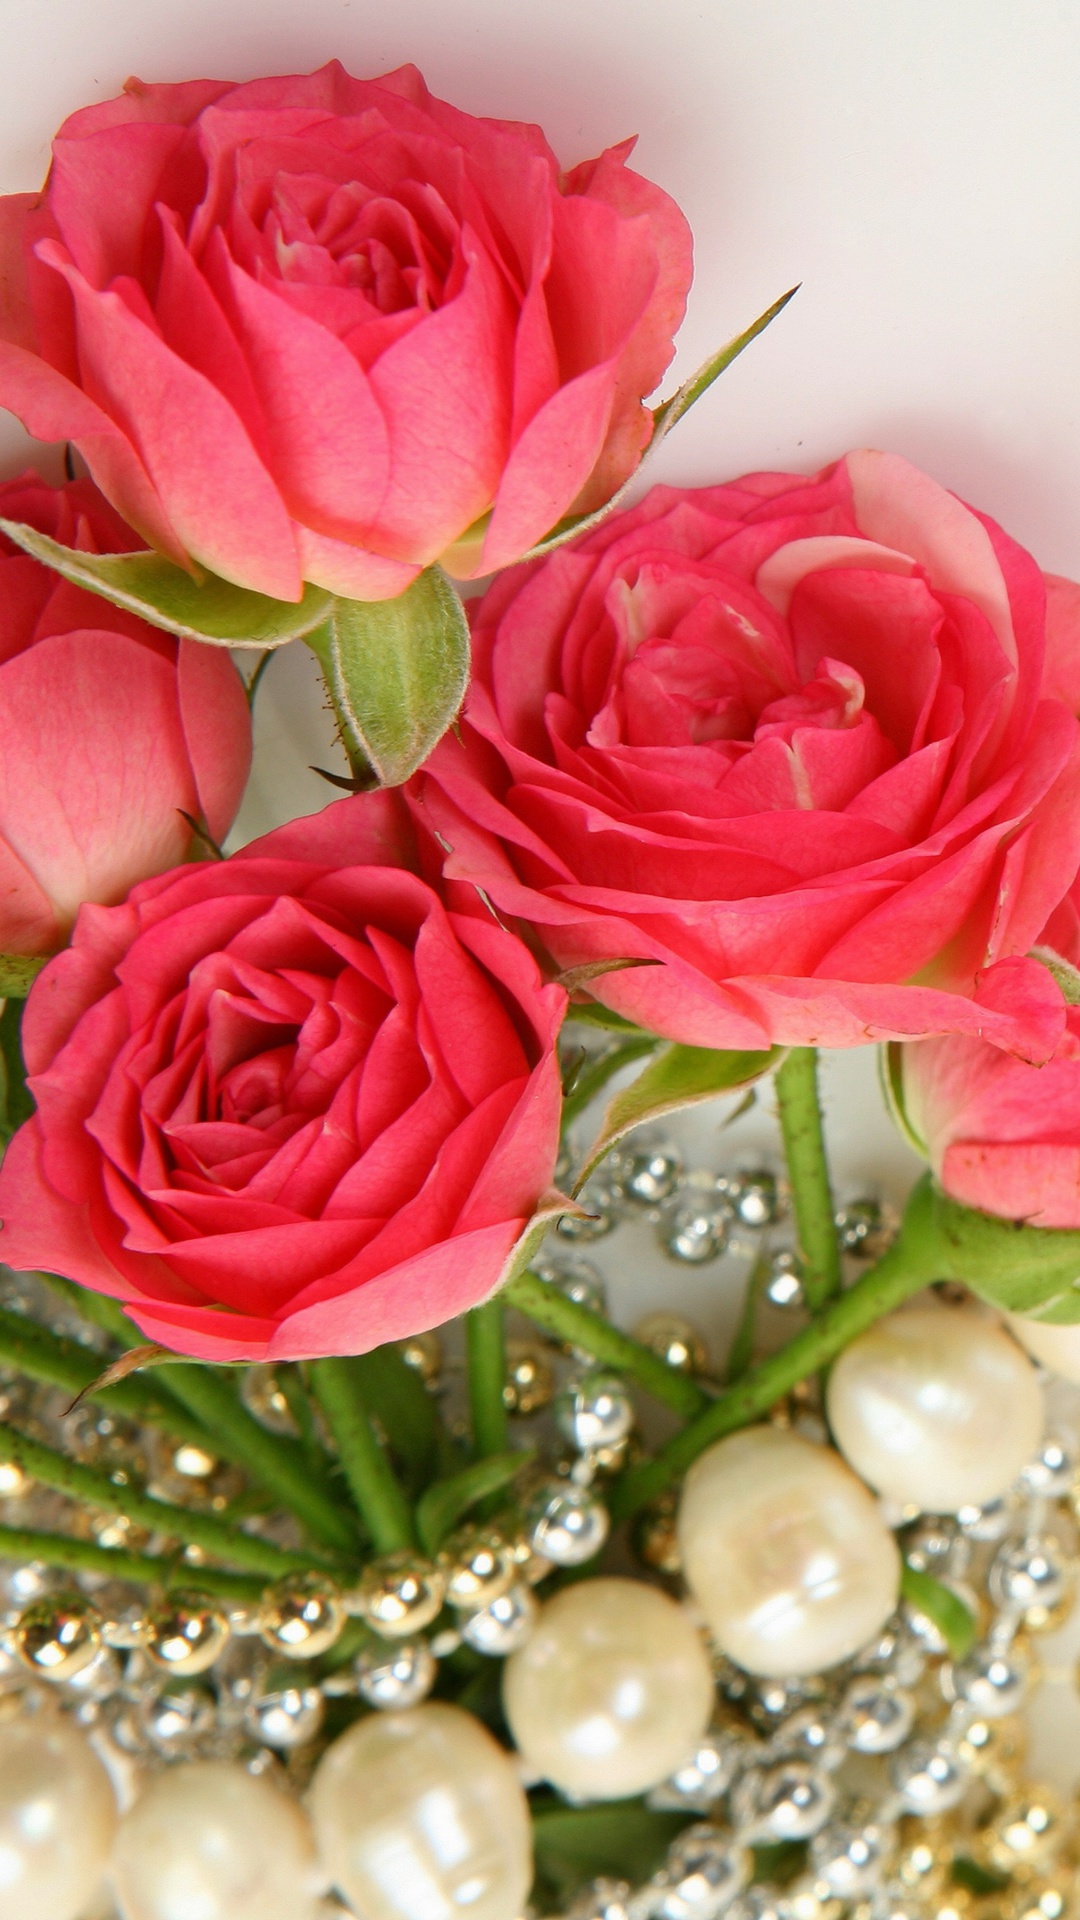 Das Necklace and Roses Bouquet Wallpaper 1080x1920